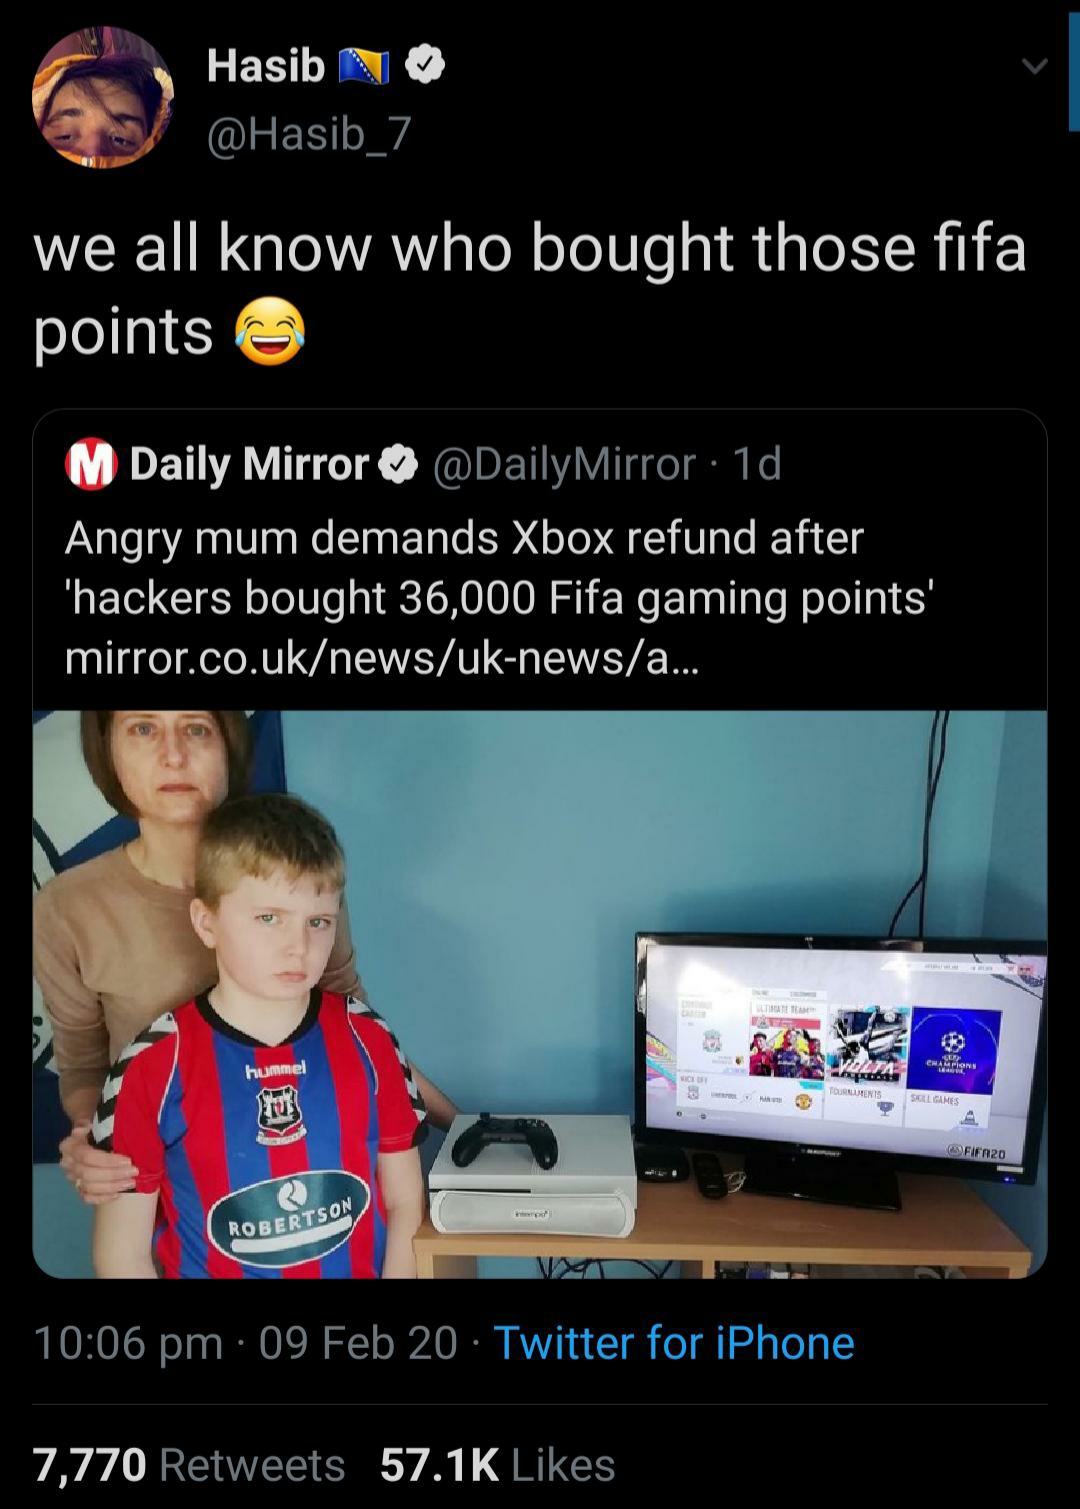 multimedia - Hasib we all know who bought those fifa points M Daily Mirror Mirror 1d Angry mum demands Xbox refund after "hackers bought 36,000 Fifa gaming points' mirror.co.uknewsuknewsa... Cations Ser Ouluns Soel Games FIFR20 Robertson 09 Feb 20 Twitter